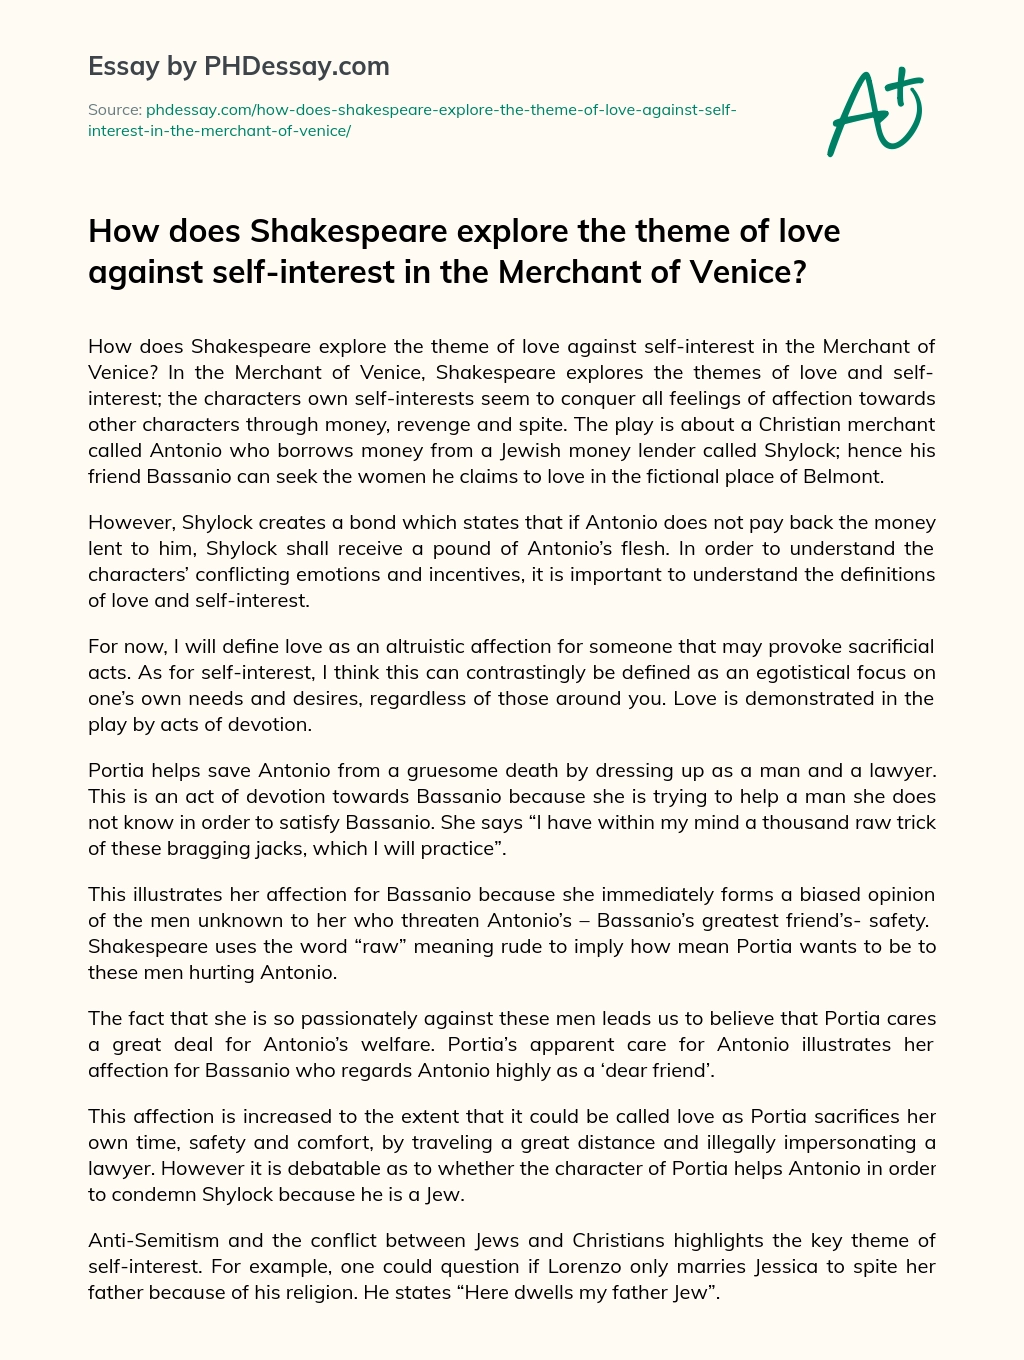 How does Shakespeare explore the theme of love against self-interest in the Merchant of Venice? essay